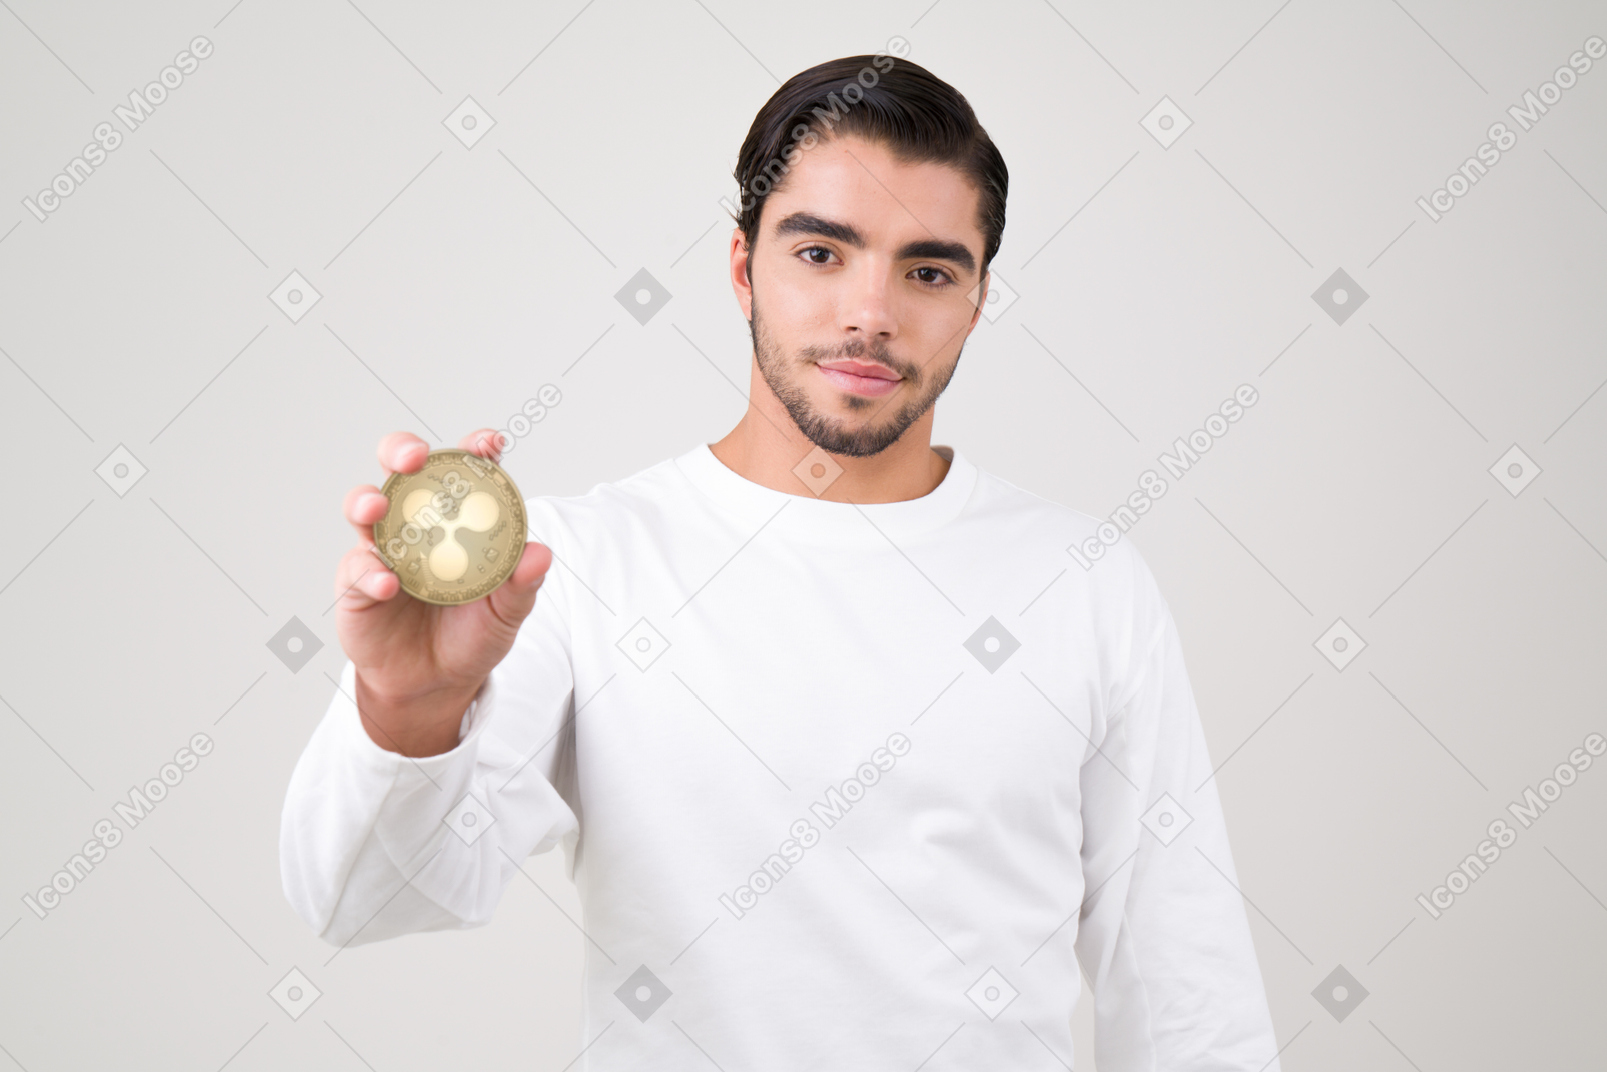 Attractive young man holding a ripple coin